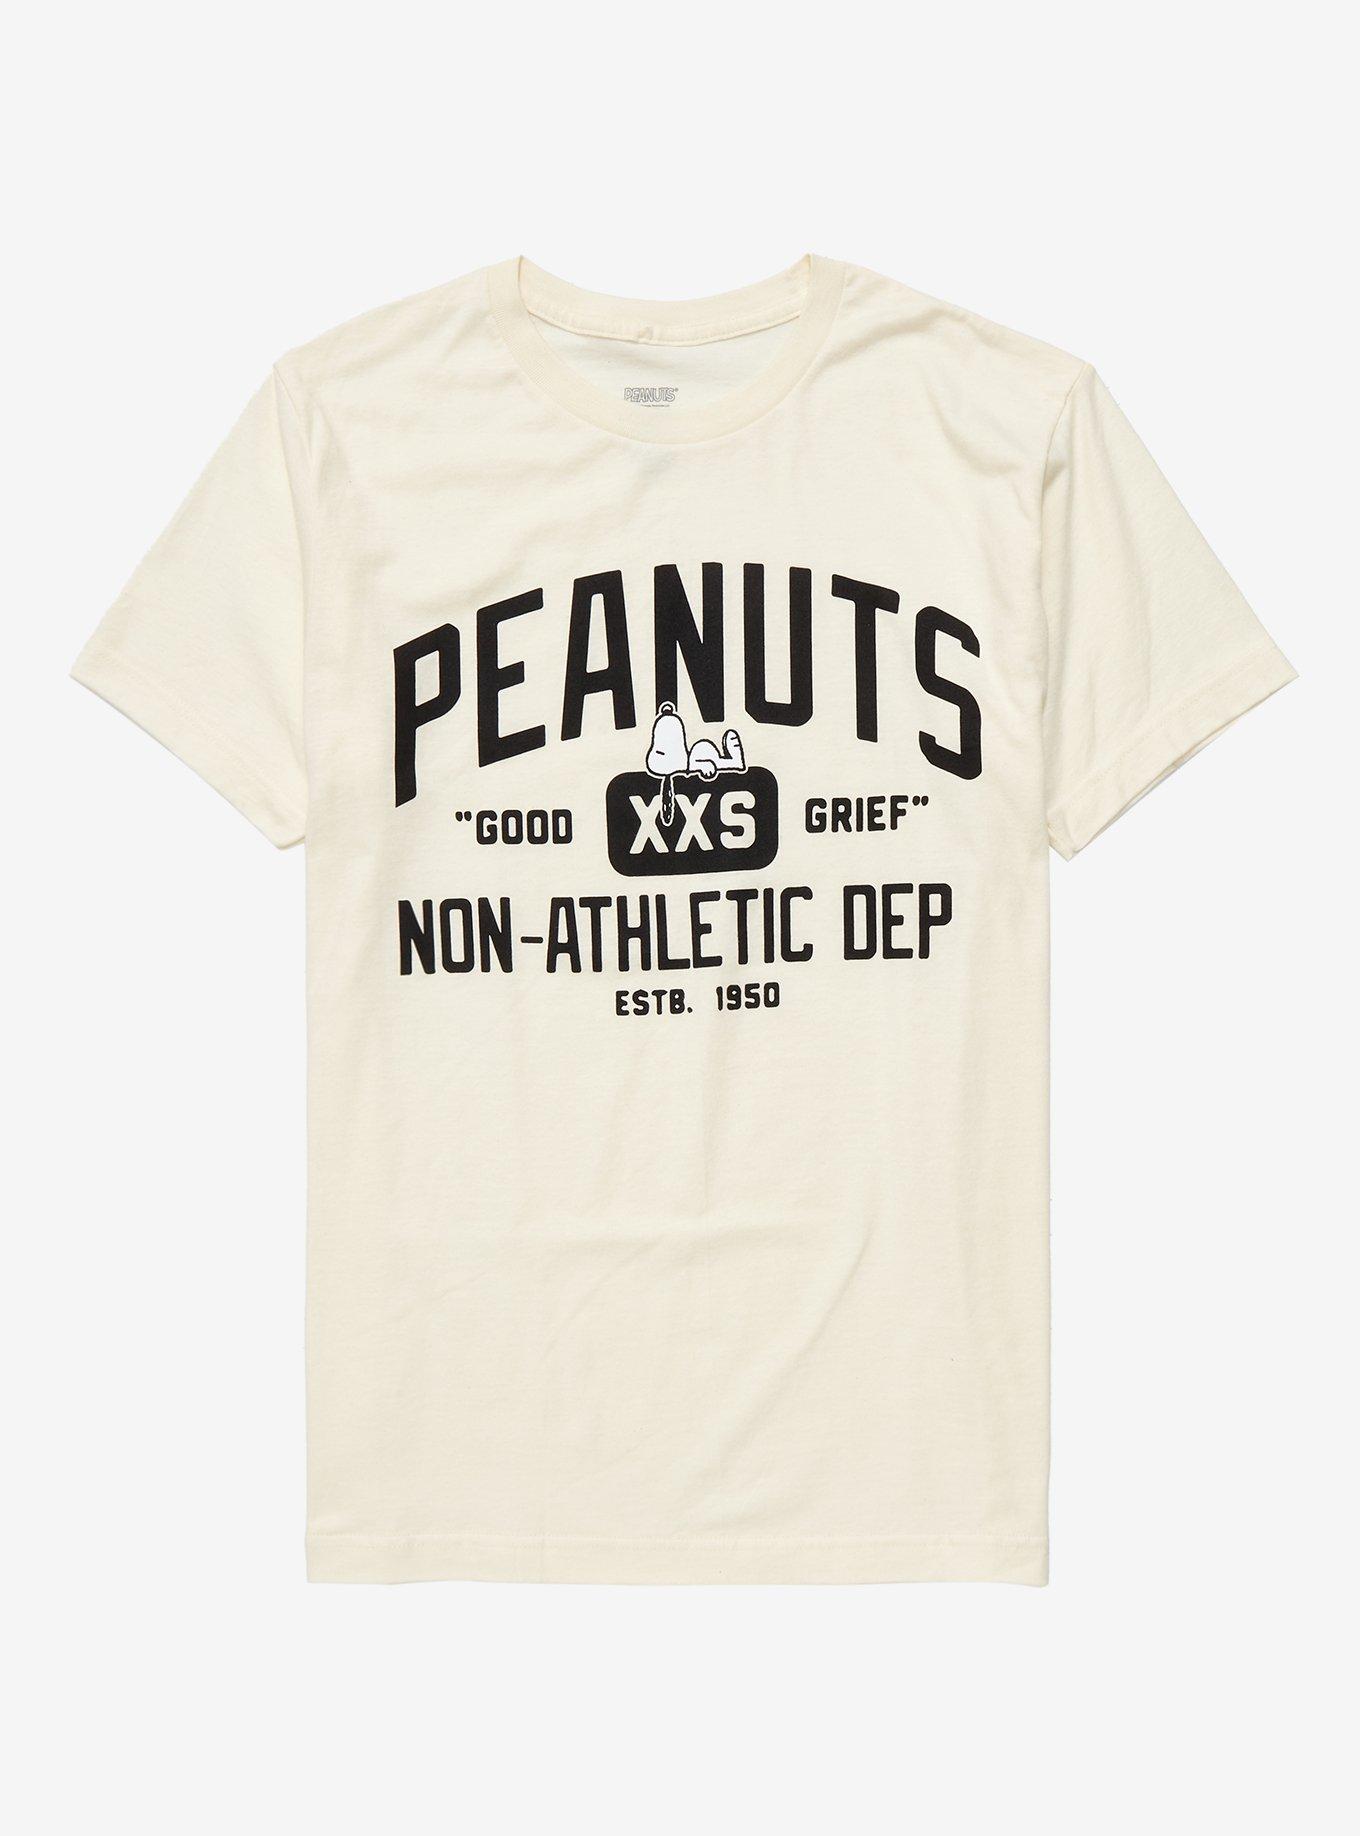 Peanuts Snoopy Non-Athletic Department T-Shirt - BoxLunch Exclusive |  BoxLunch